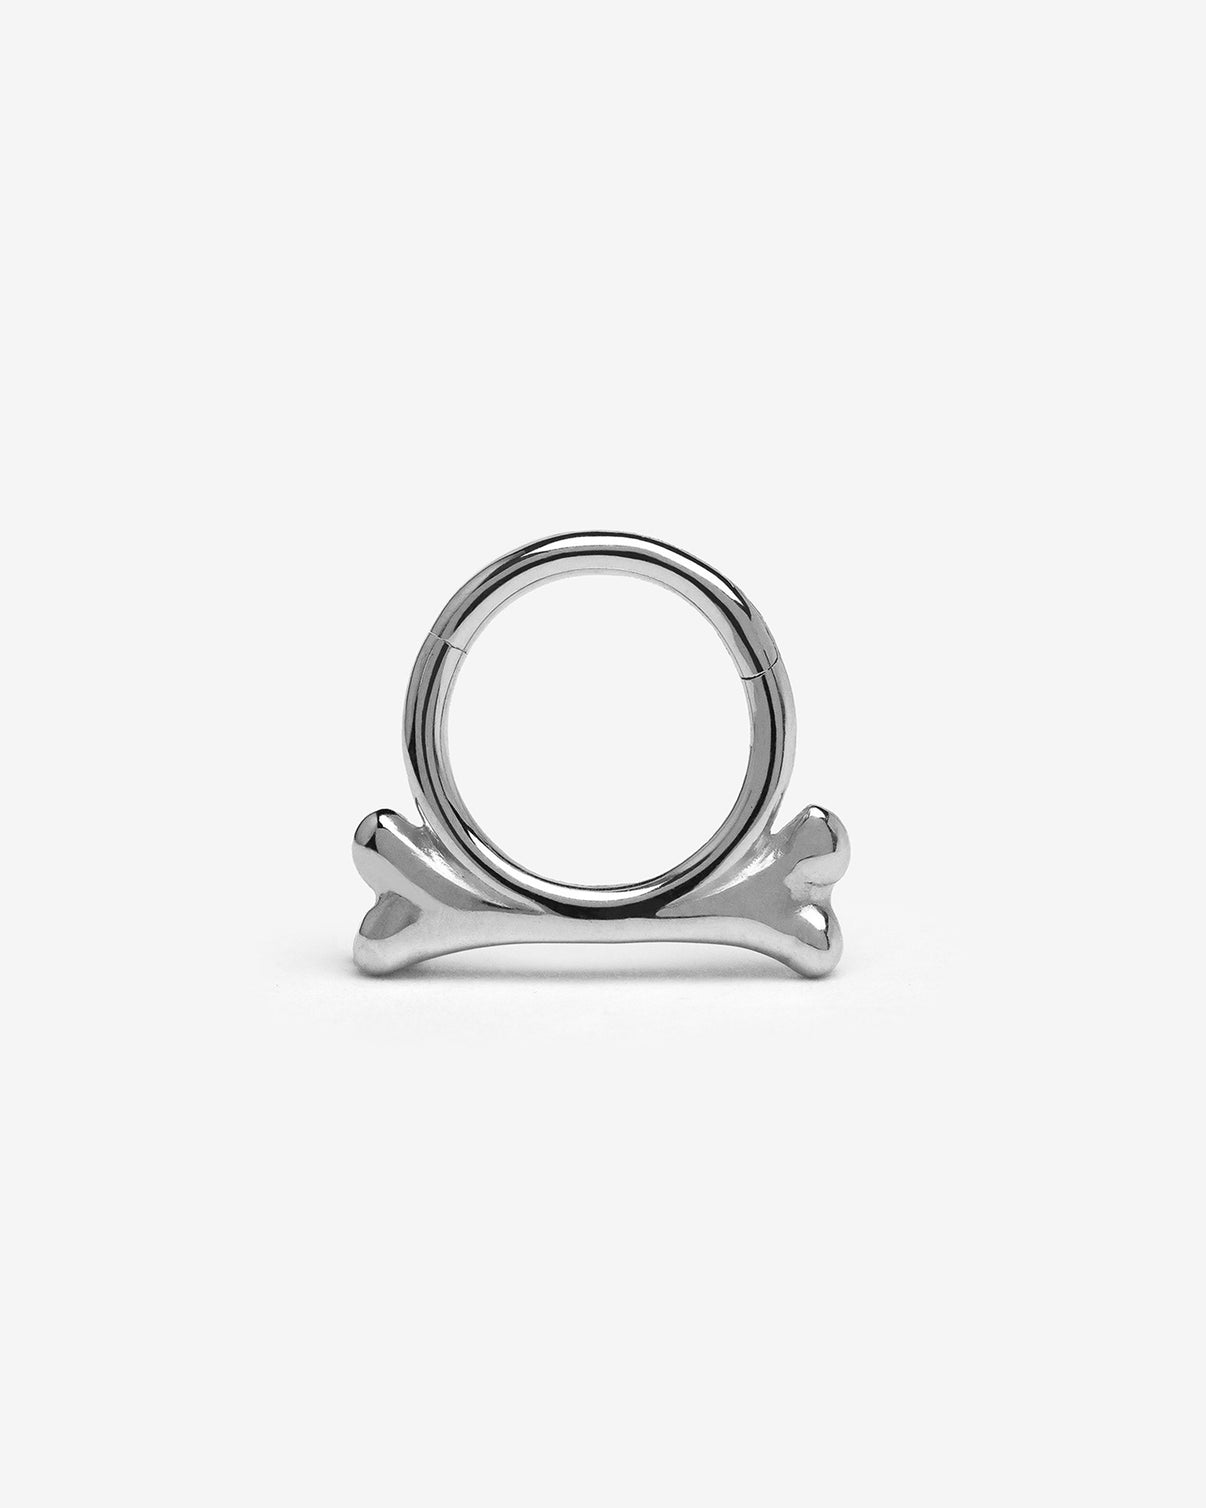 MARTYR CLICKER | Body Jewelry | Septum Rings – Ask and Embla